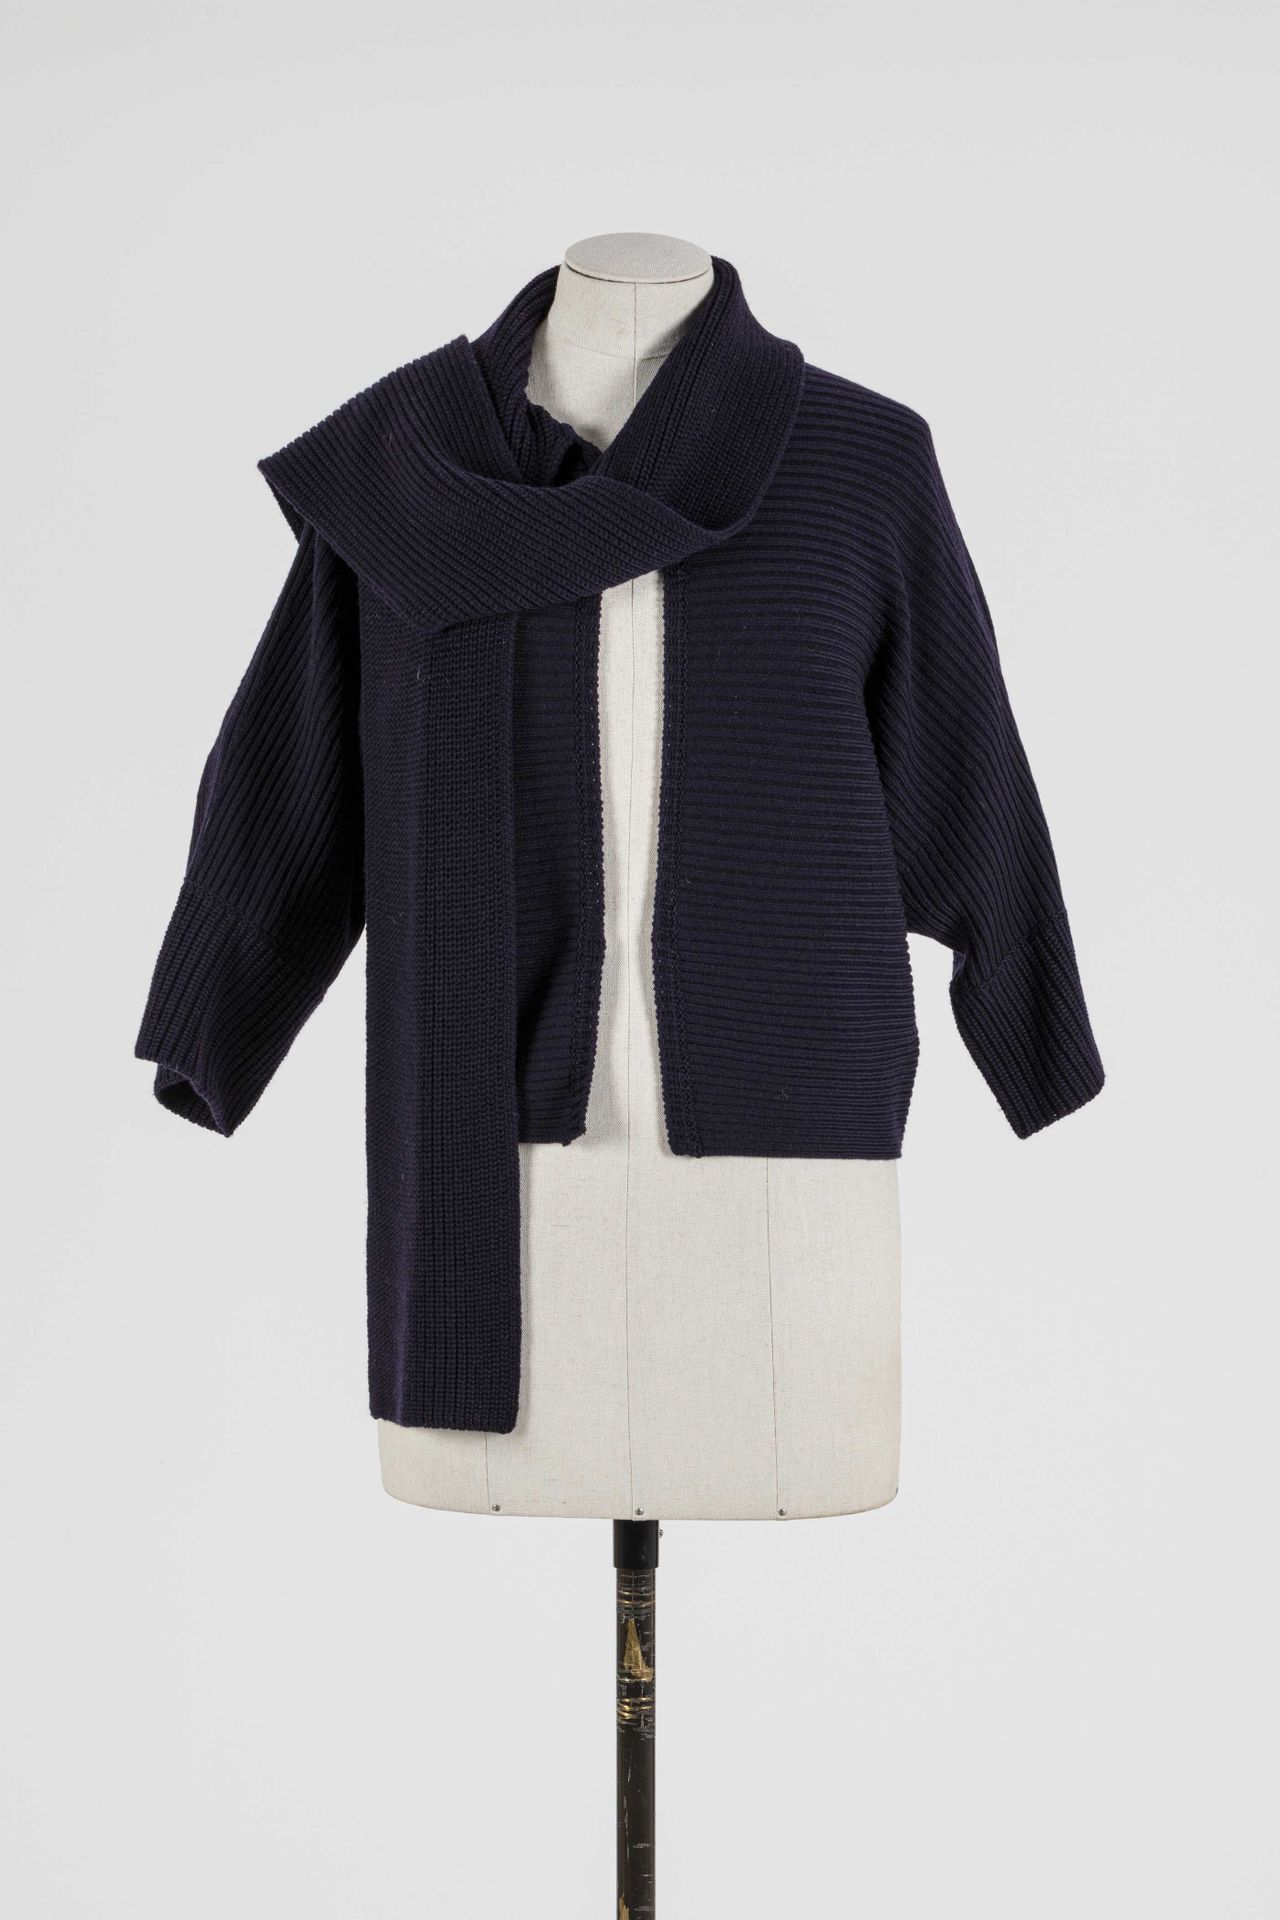 Null ESCADA: navy blue wool cardigan, collar extended by a scarf, closure by a s&hellip;